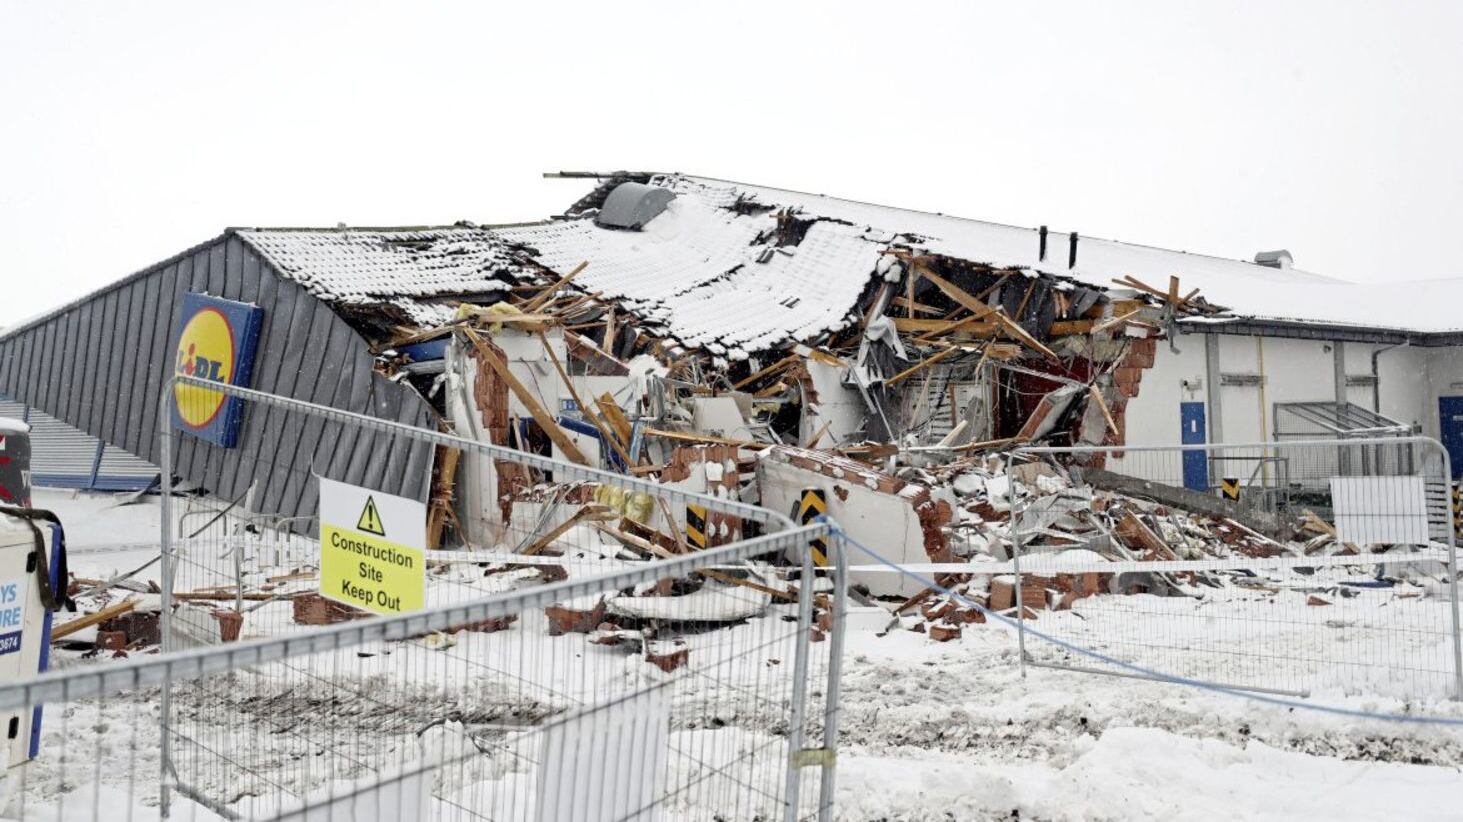 The Lidl store on Fortunestown Lane, Tallaght, was attacked during snow storms. Picture by Niall Carson, Press Association 